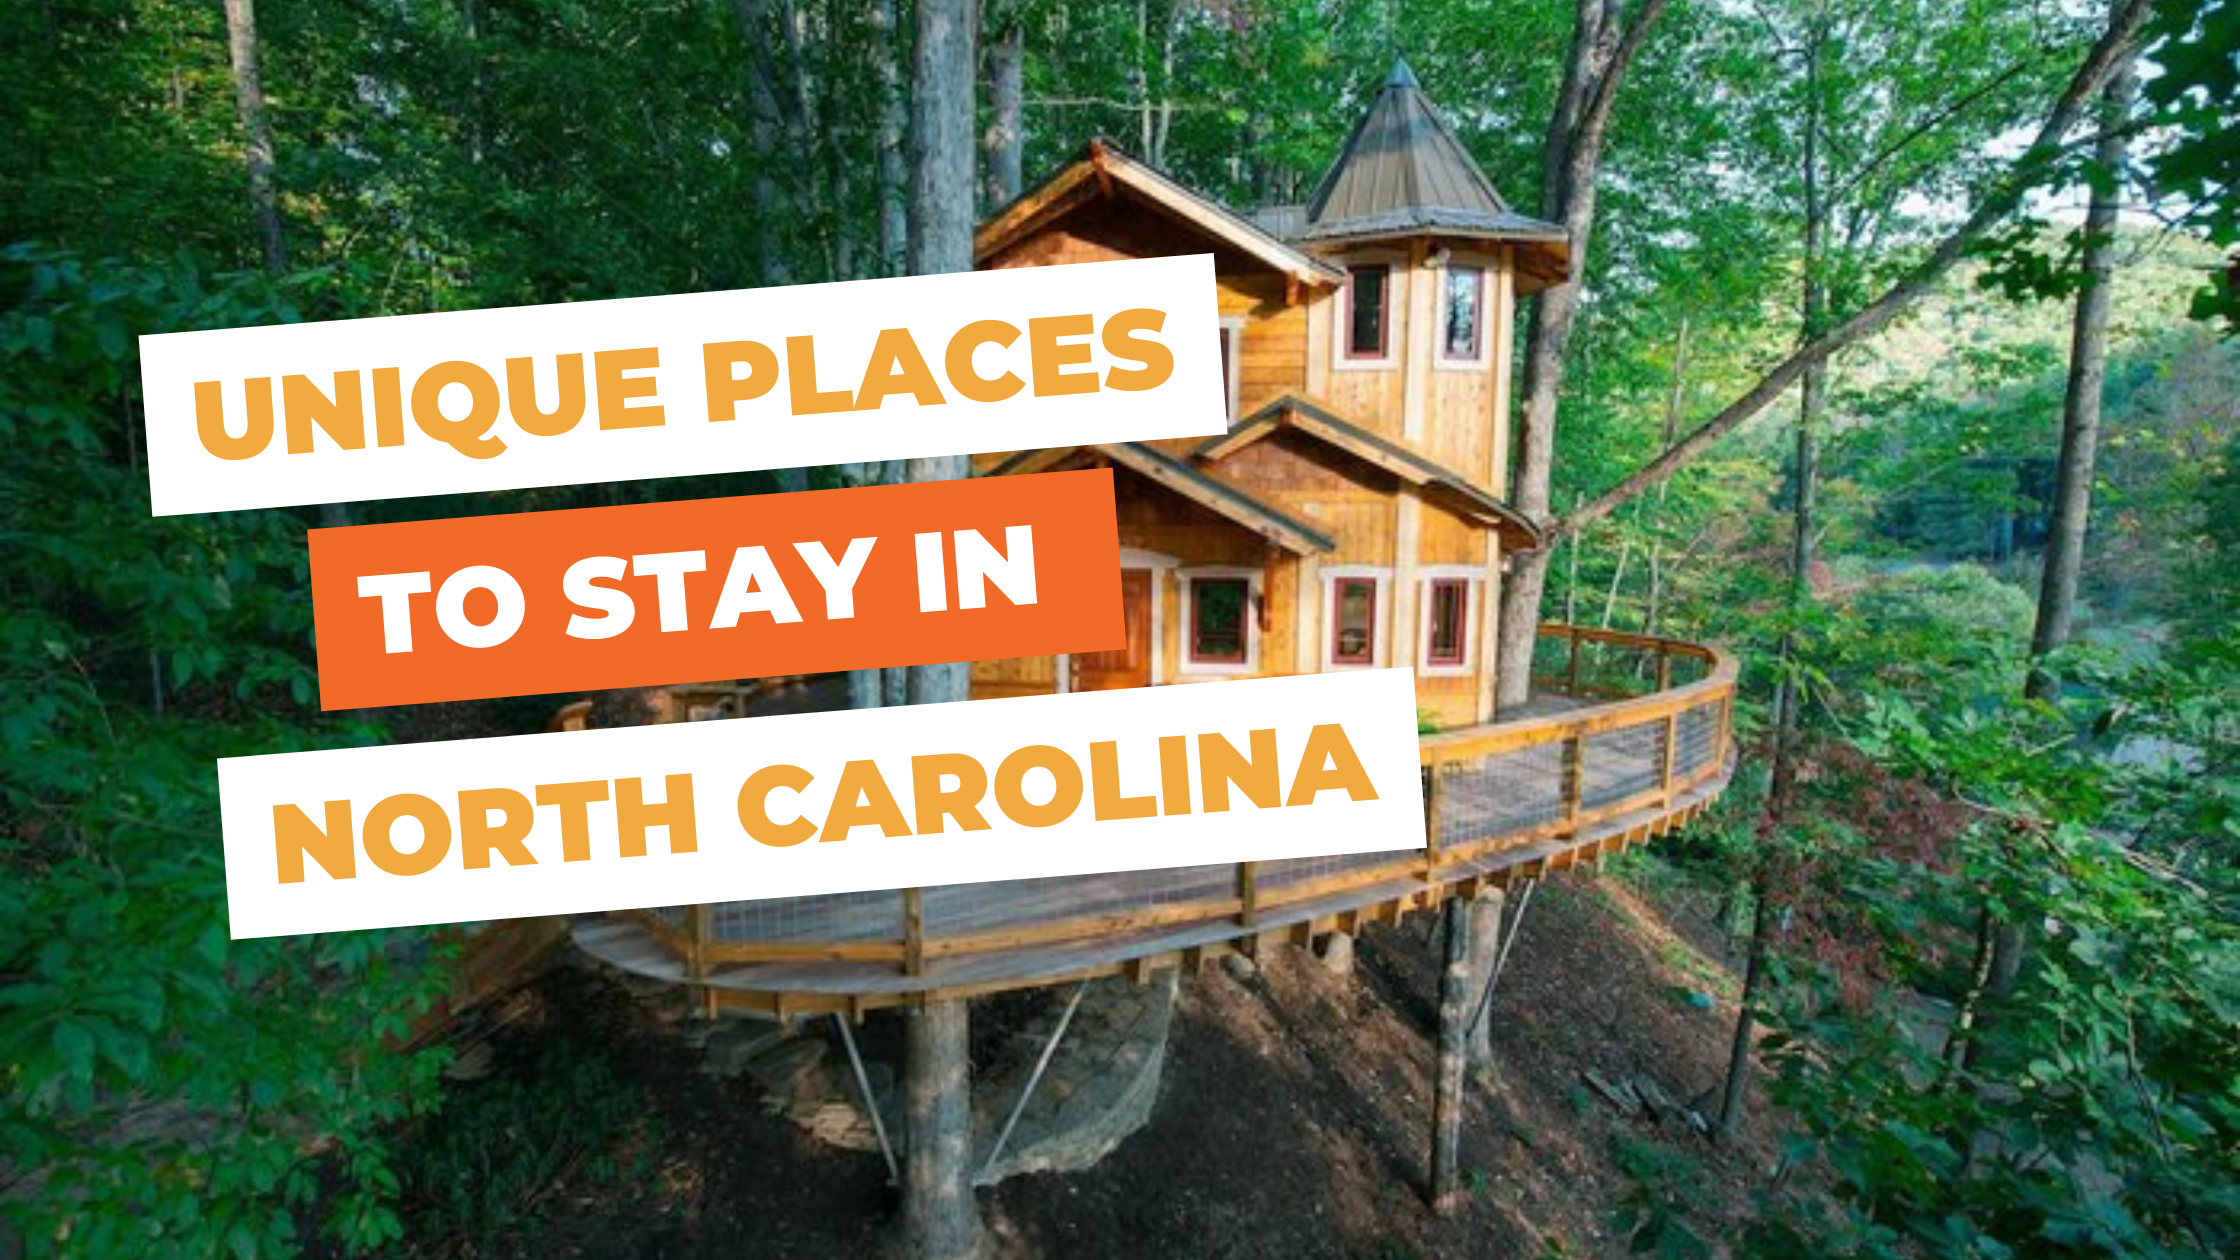 10 Unique Places To Stay In North Carolina That Will Give You An Unforgettable Experience